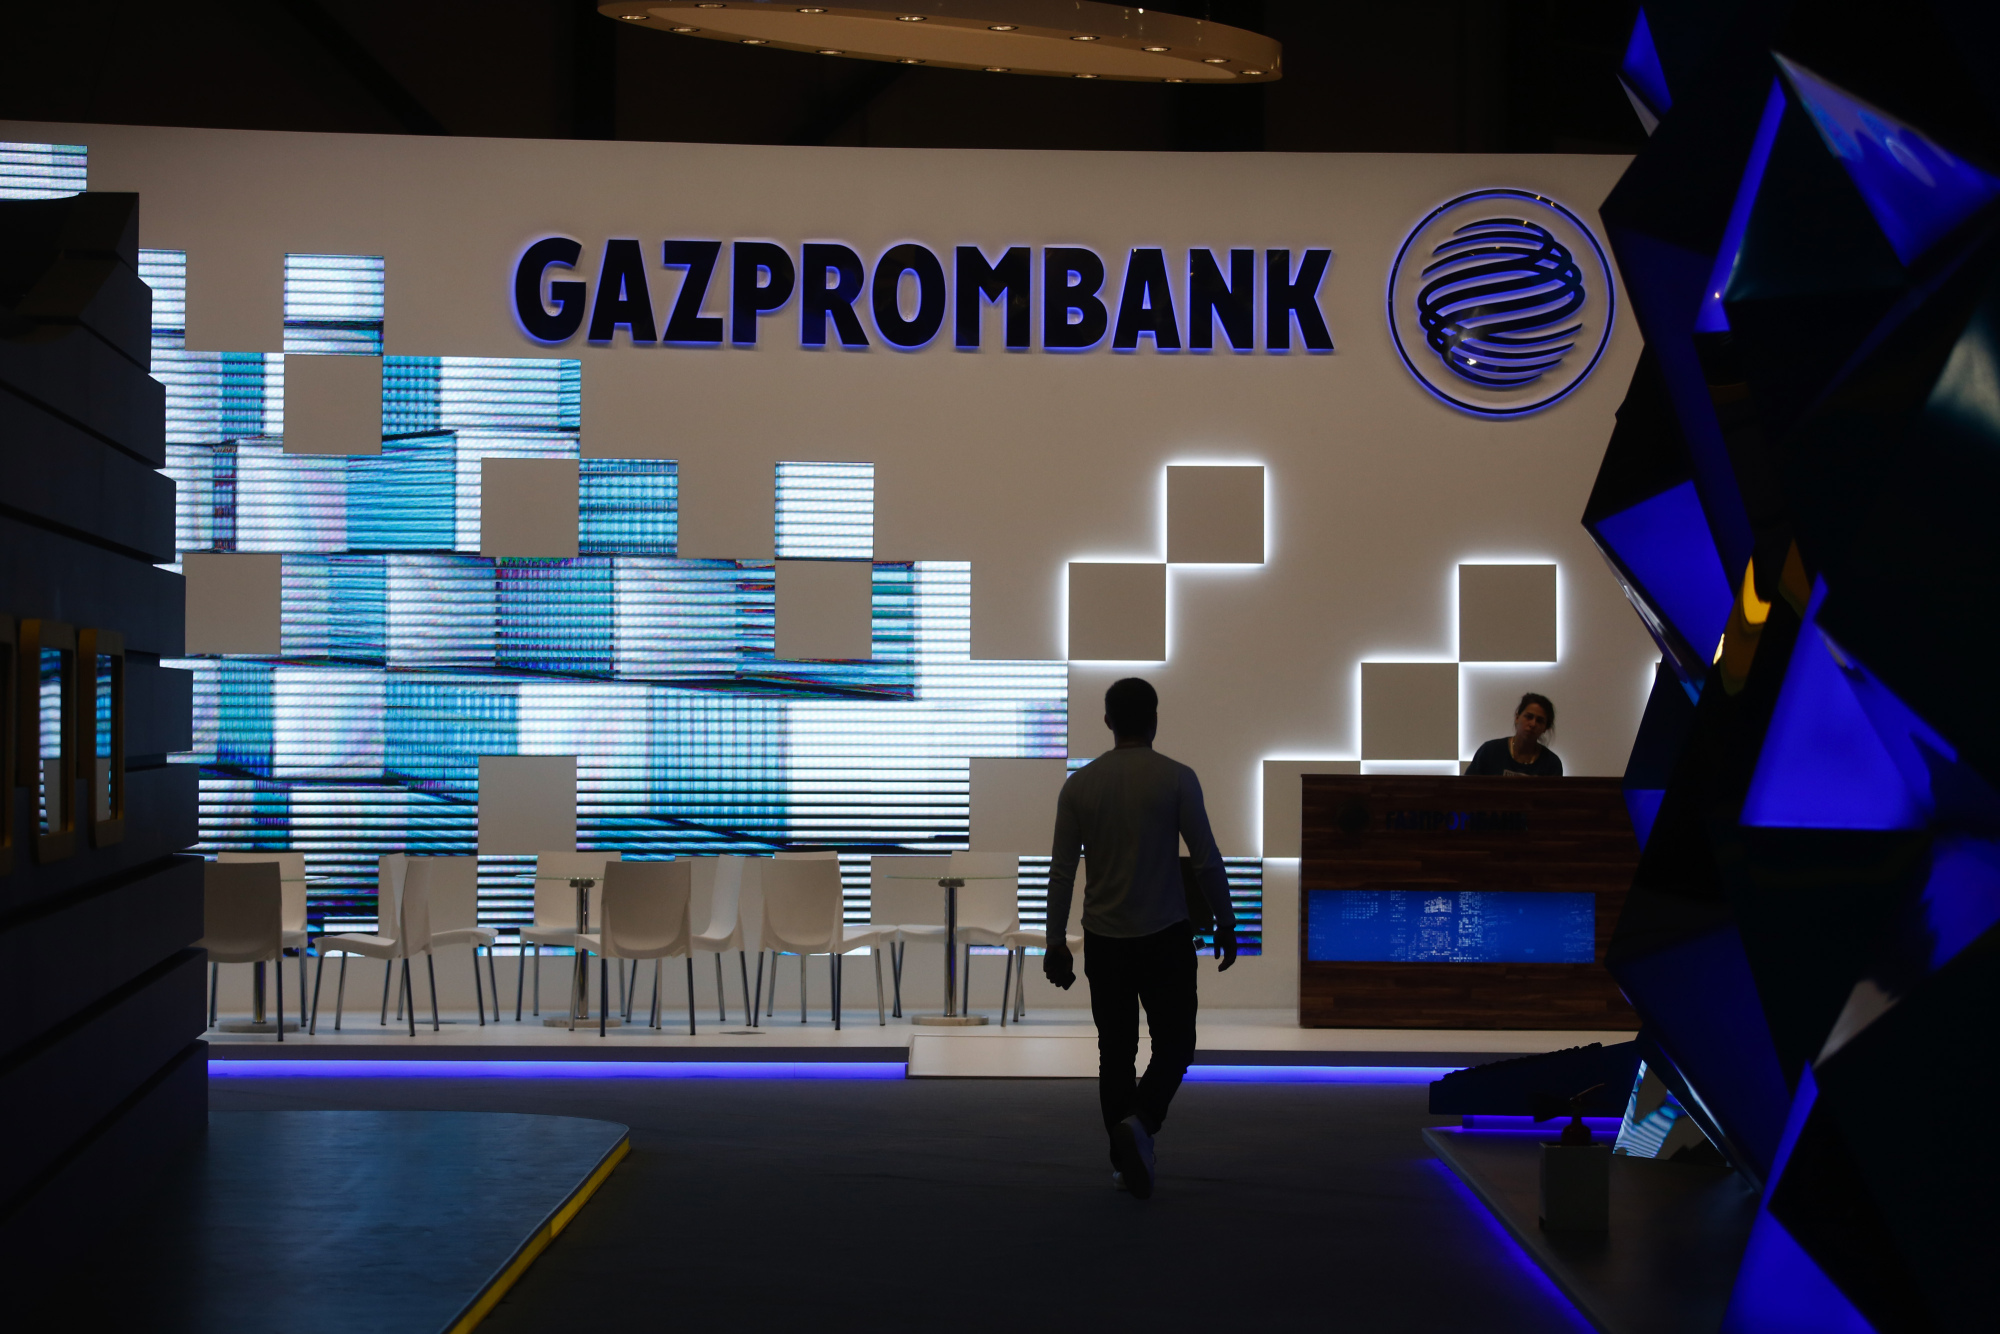 War in Ukraine: Why Russia's Gazprombank Escaped Sanctions - Bloomberg